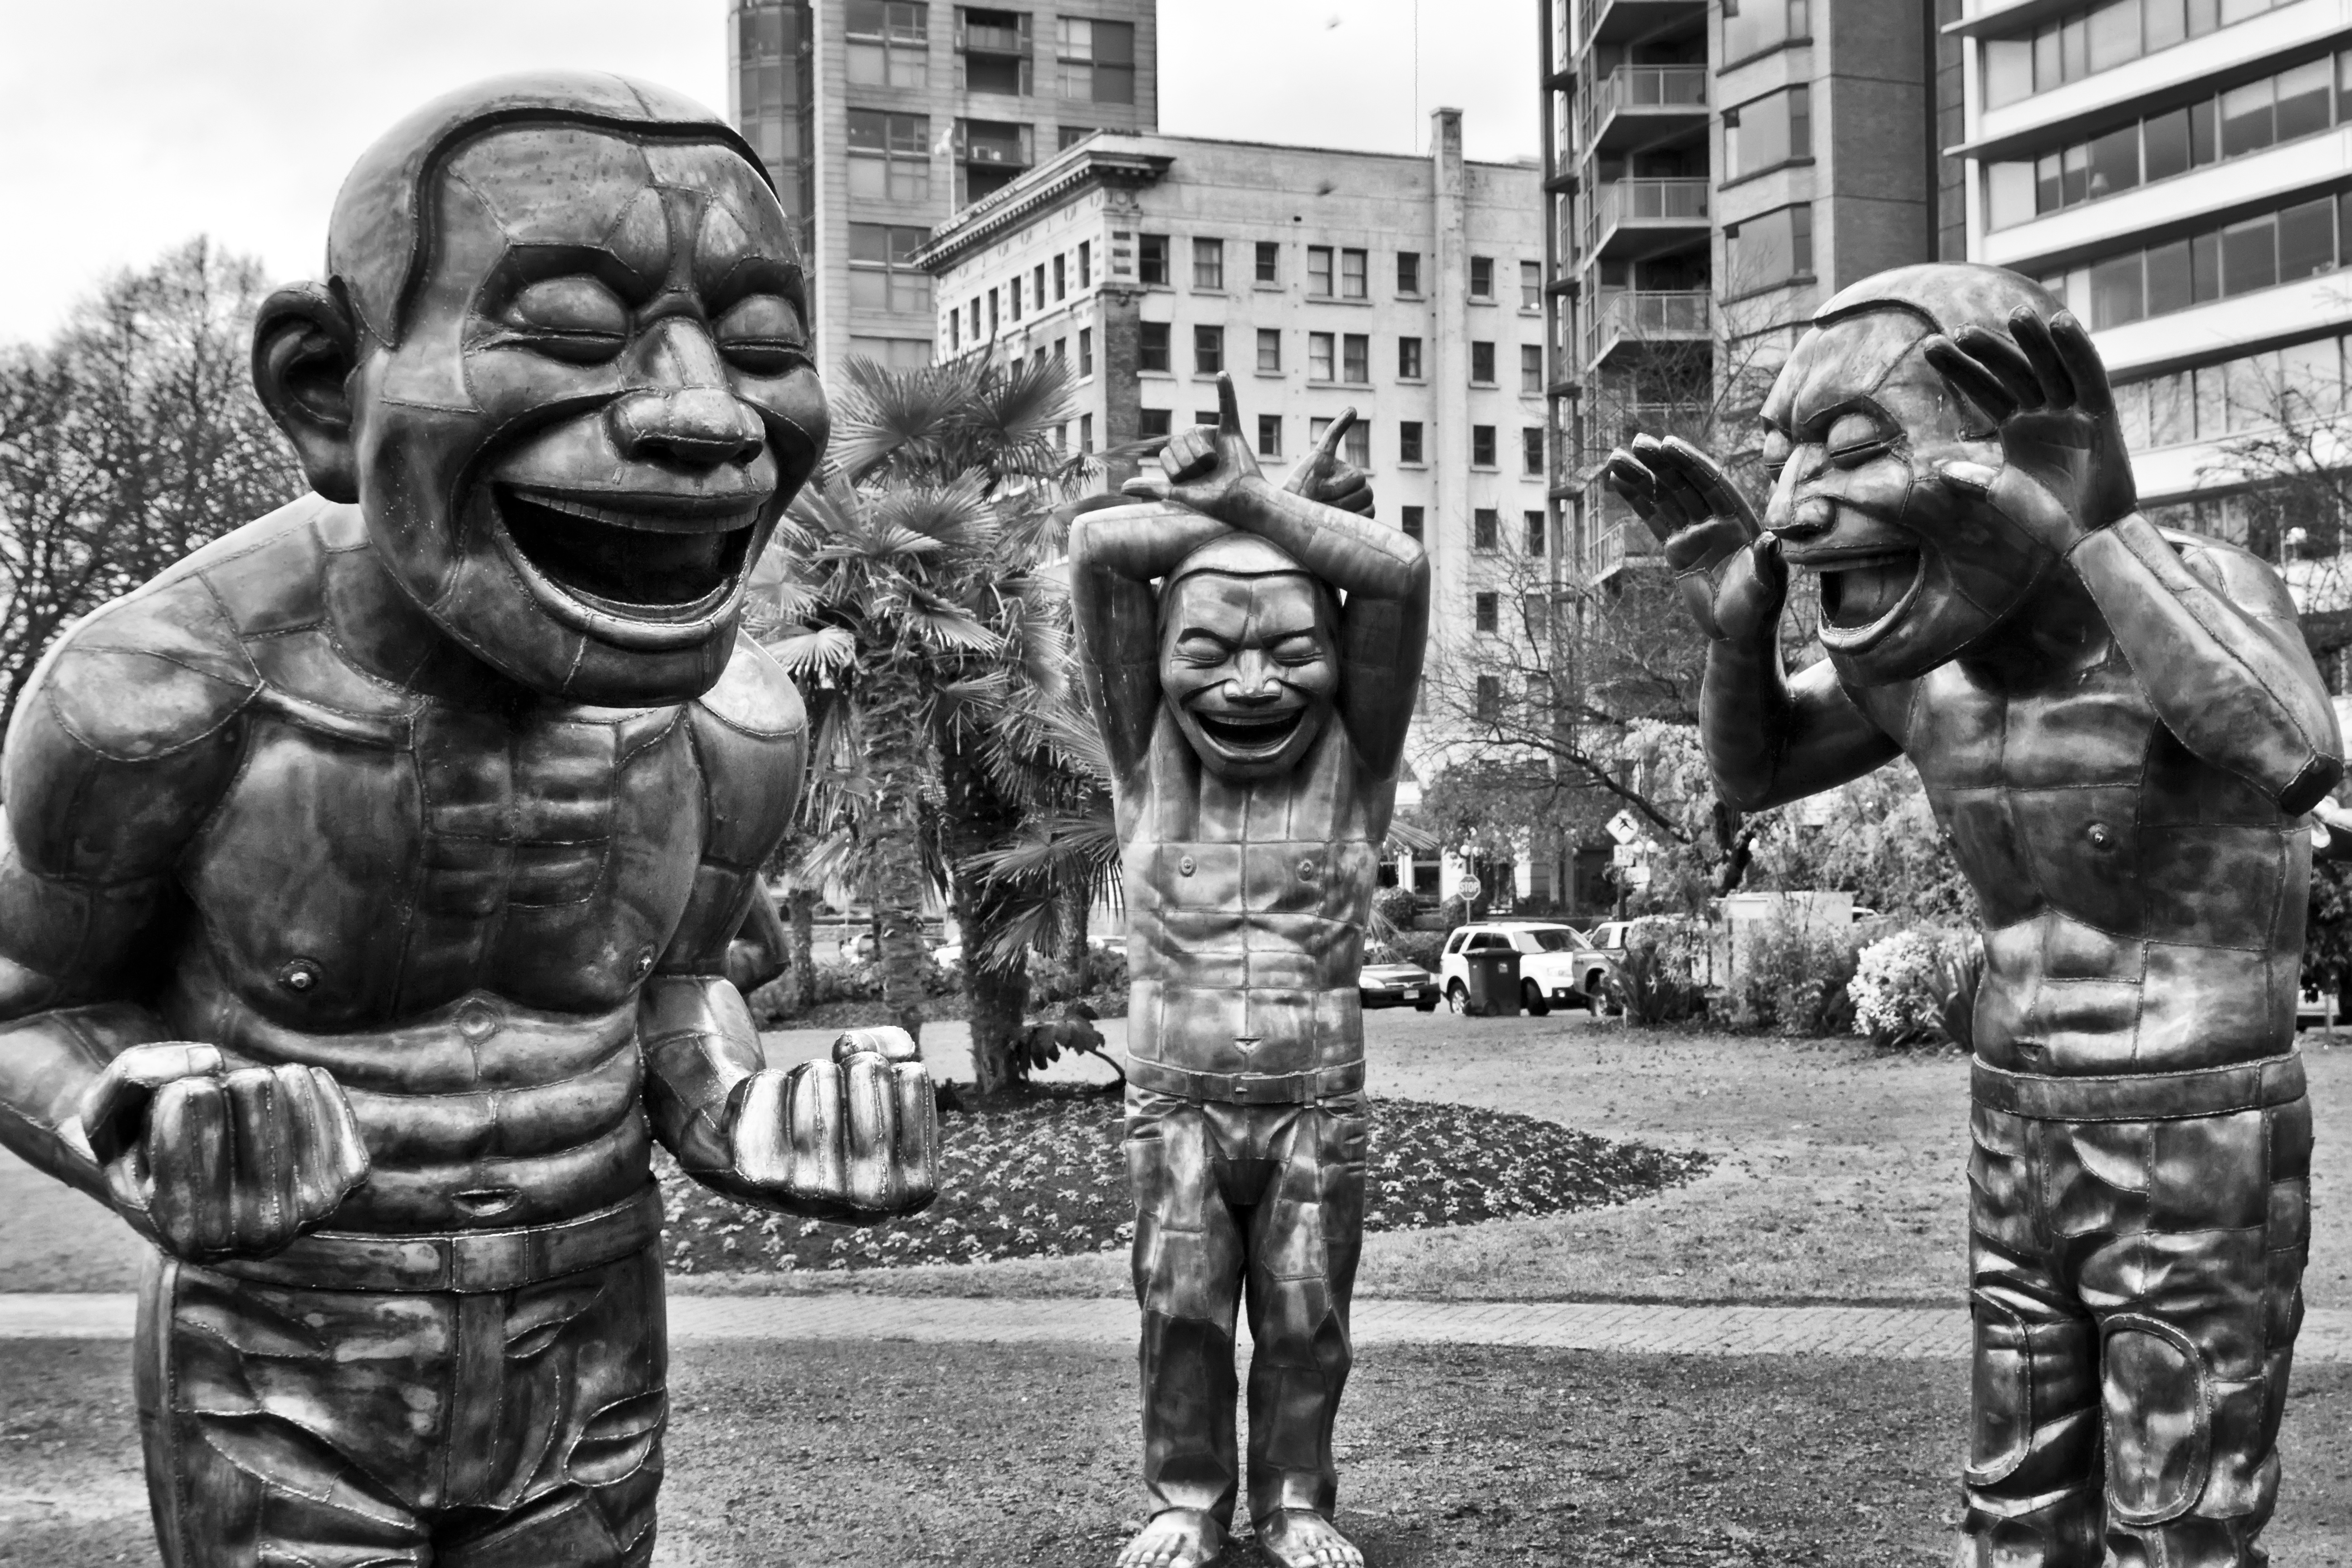 Yue Minjun's A-maze-ing Laughter, Vancouver, Canada, photo by Stefano Costanzo